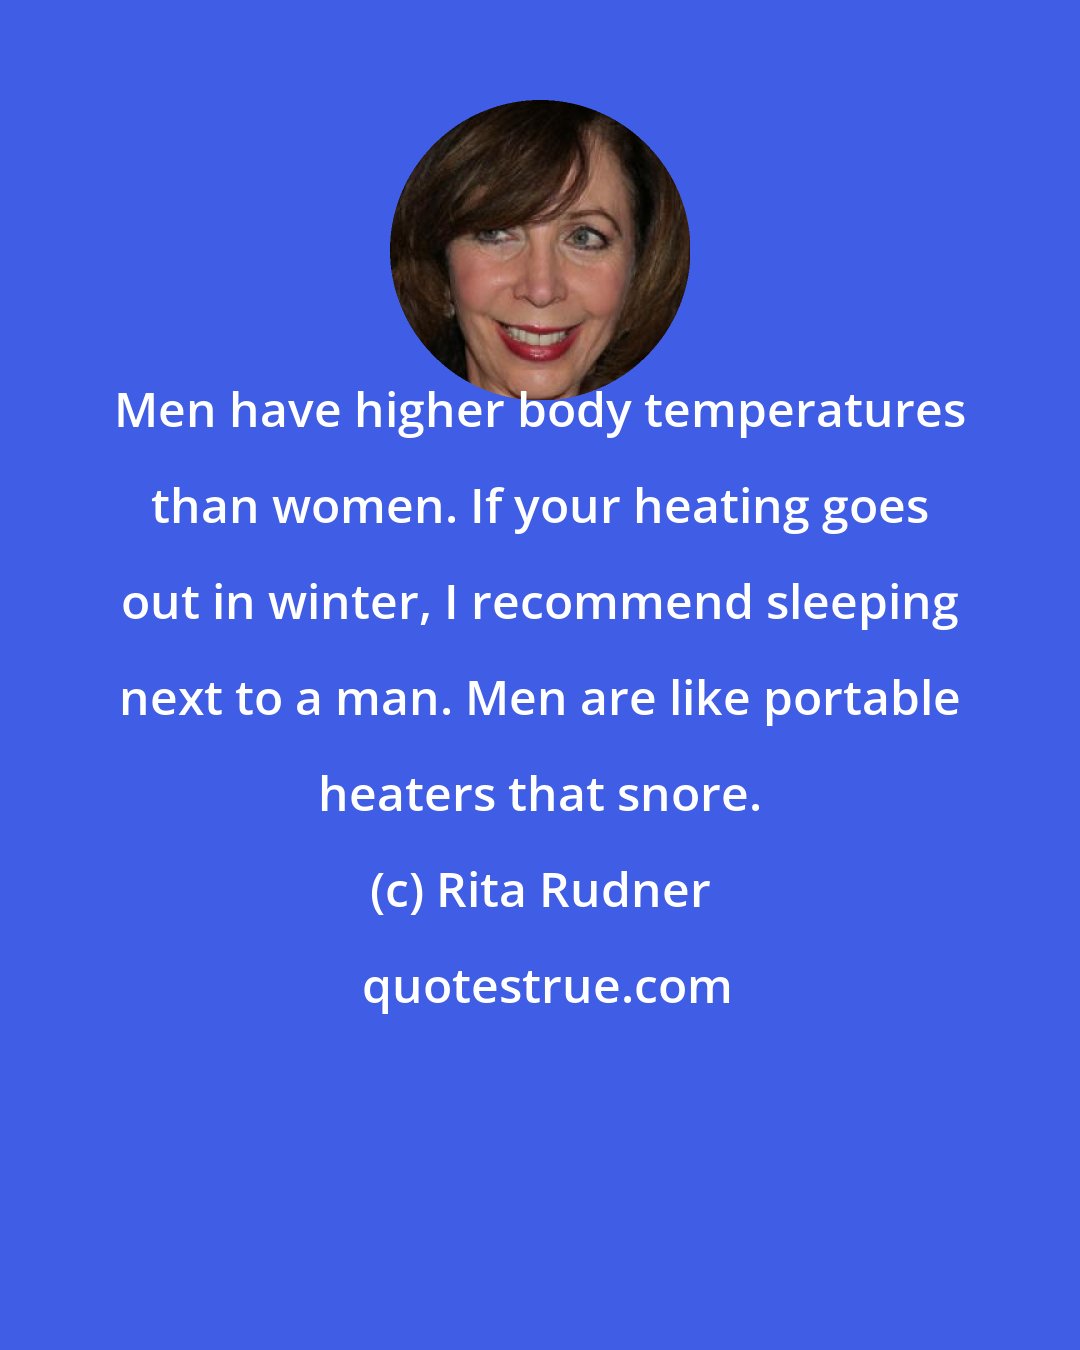 Rita Rudner: Men have higher body temperatures than women. If your heating goes out in winter, I recommend sleeping next to a man. Men are like portable heaters that snore.